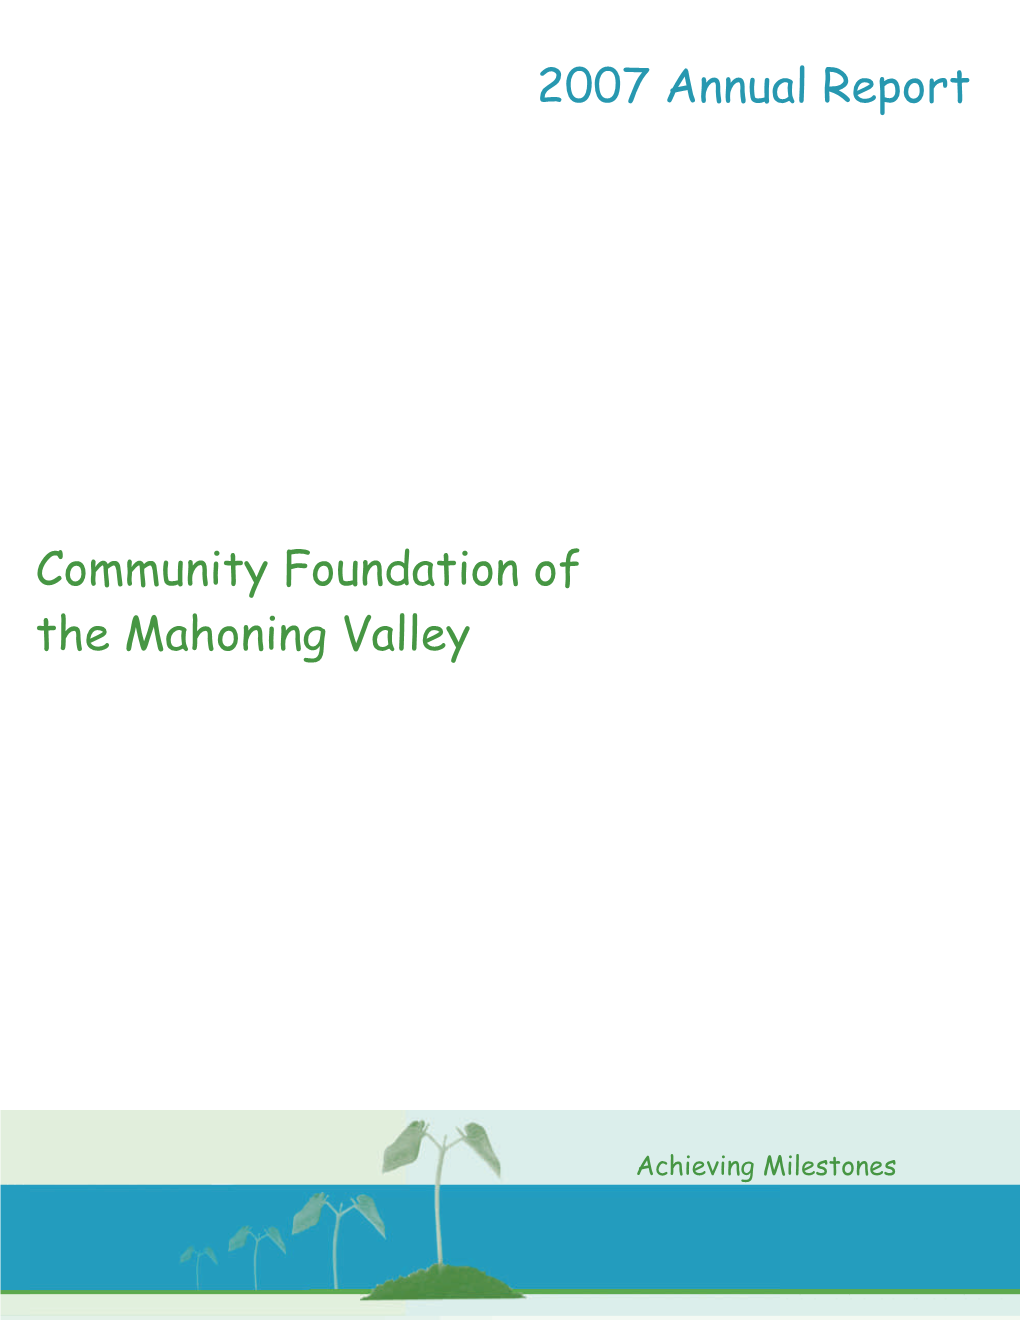 2007 Annual Report Community Foundation of the Mahoning Valley